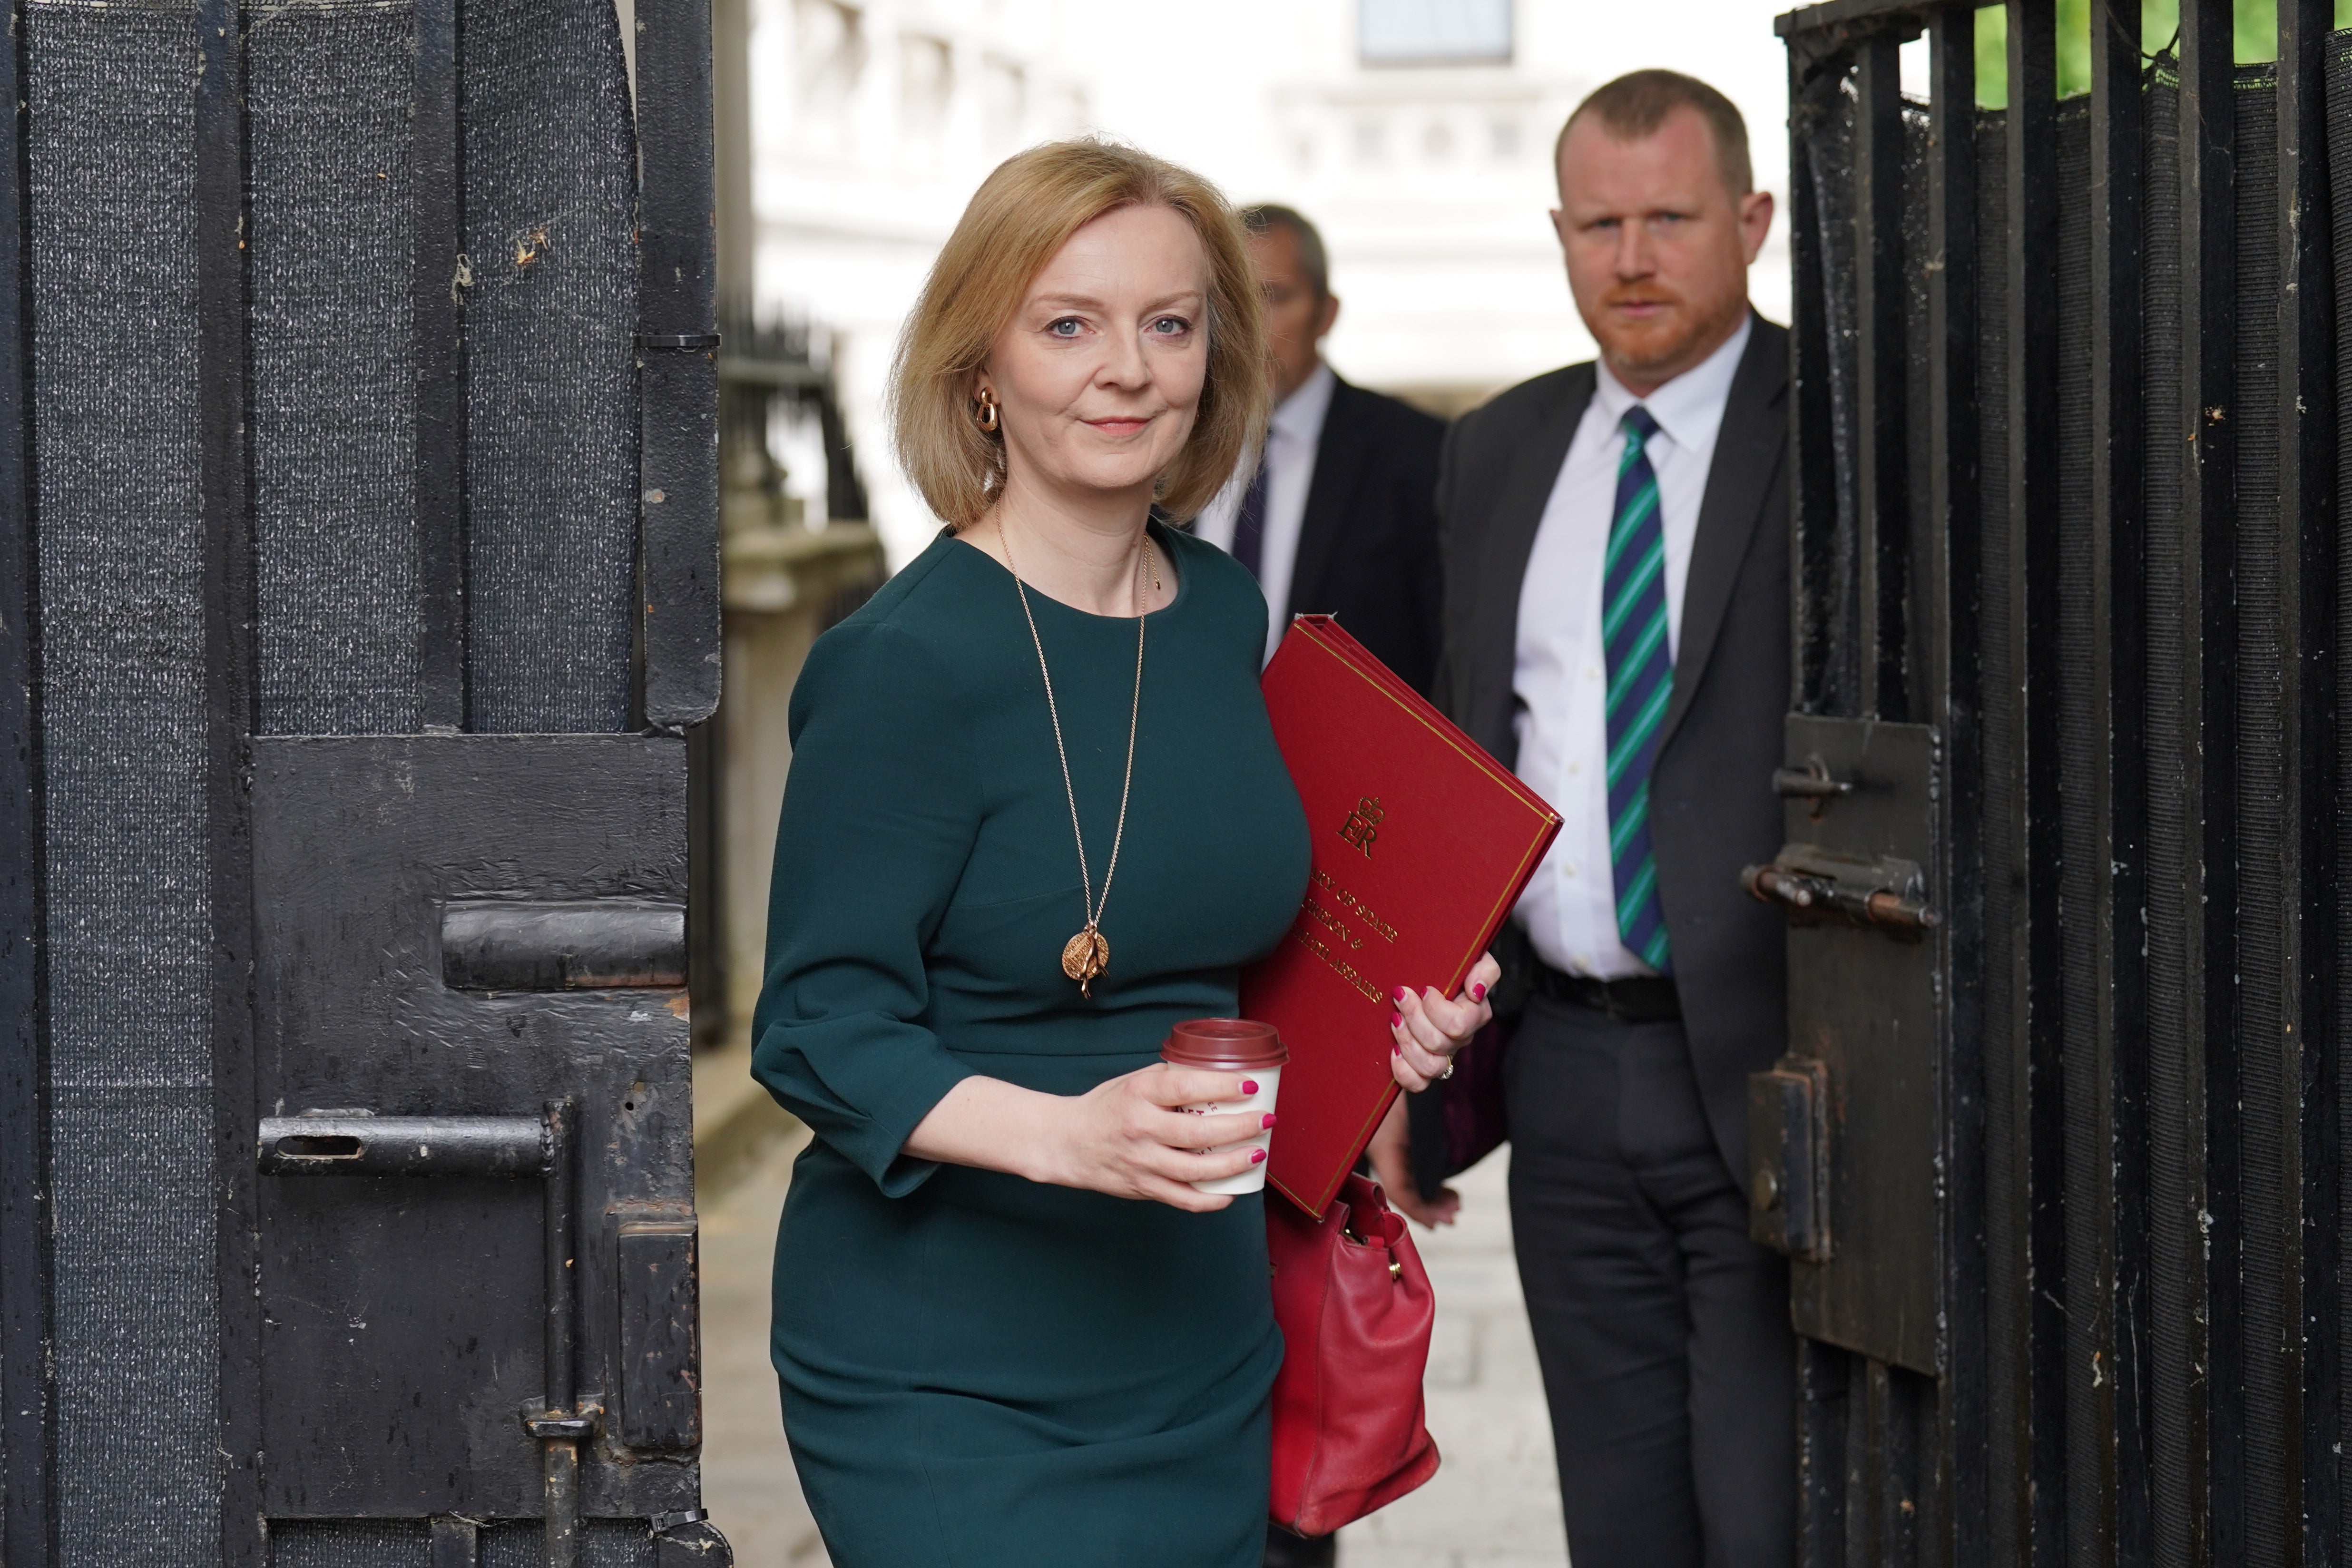 Foreign Secretary Liz Truss became the 10th candidate to launch their campaign